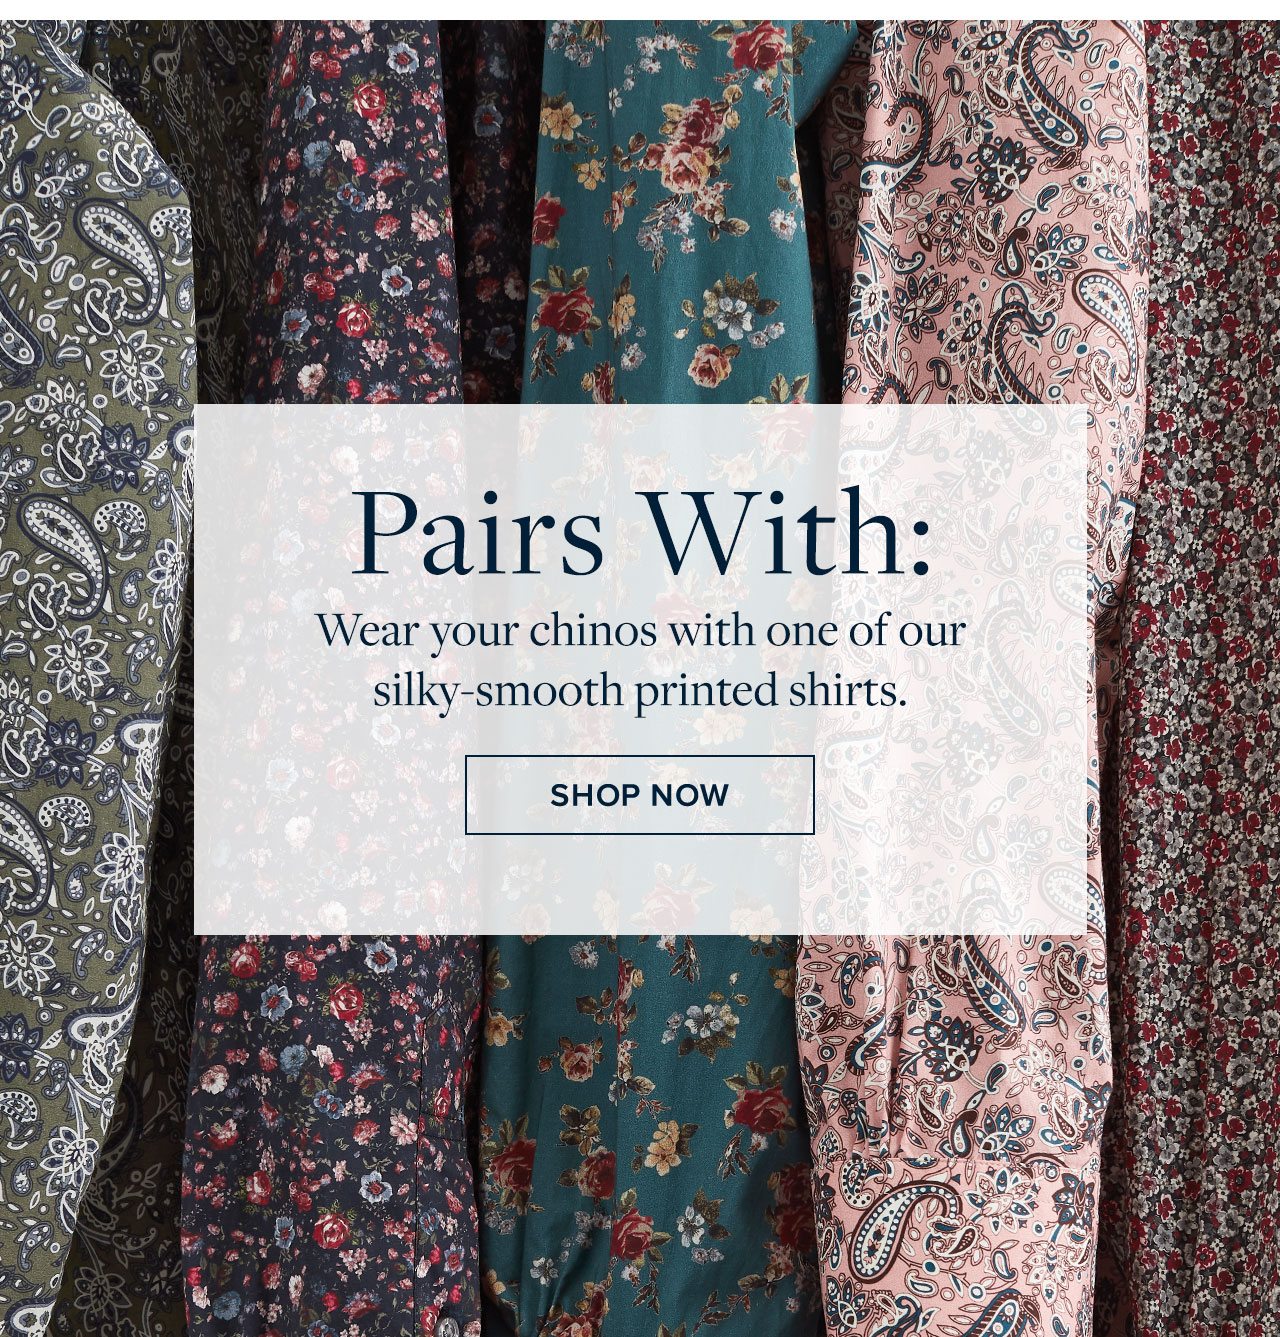 Pairs with: Wear your chinos with one of our silky-smooth printed shirts.